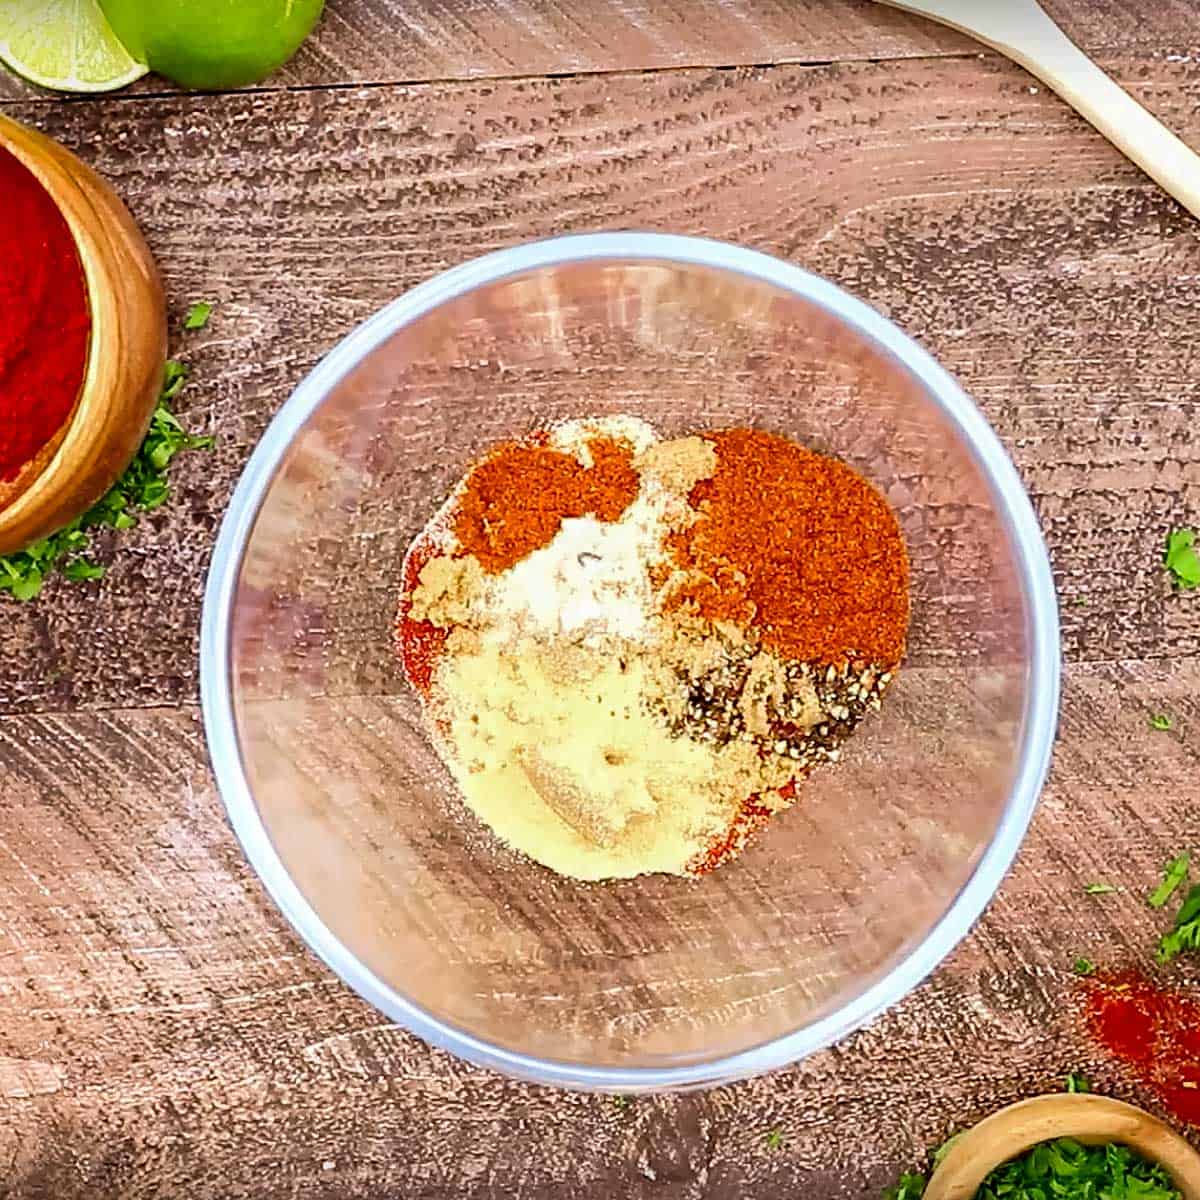 Glass bowl filled with spicy rub ingredients